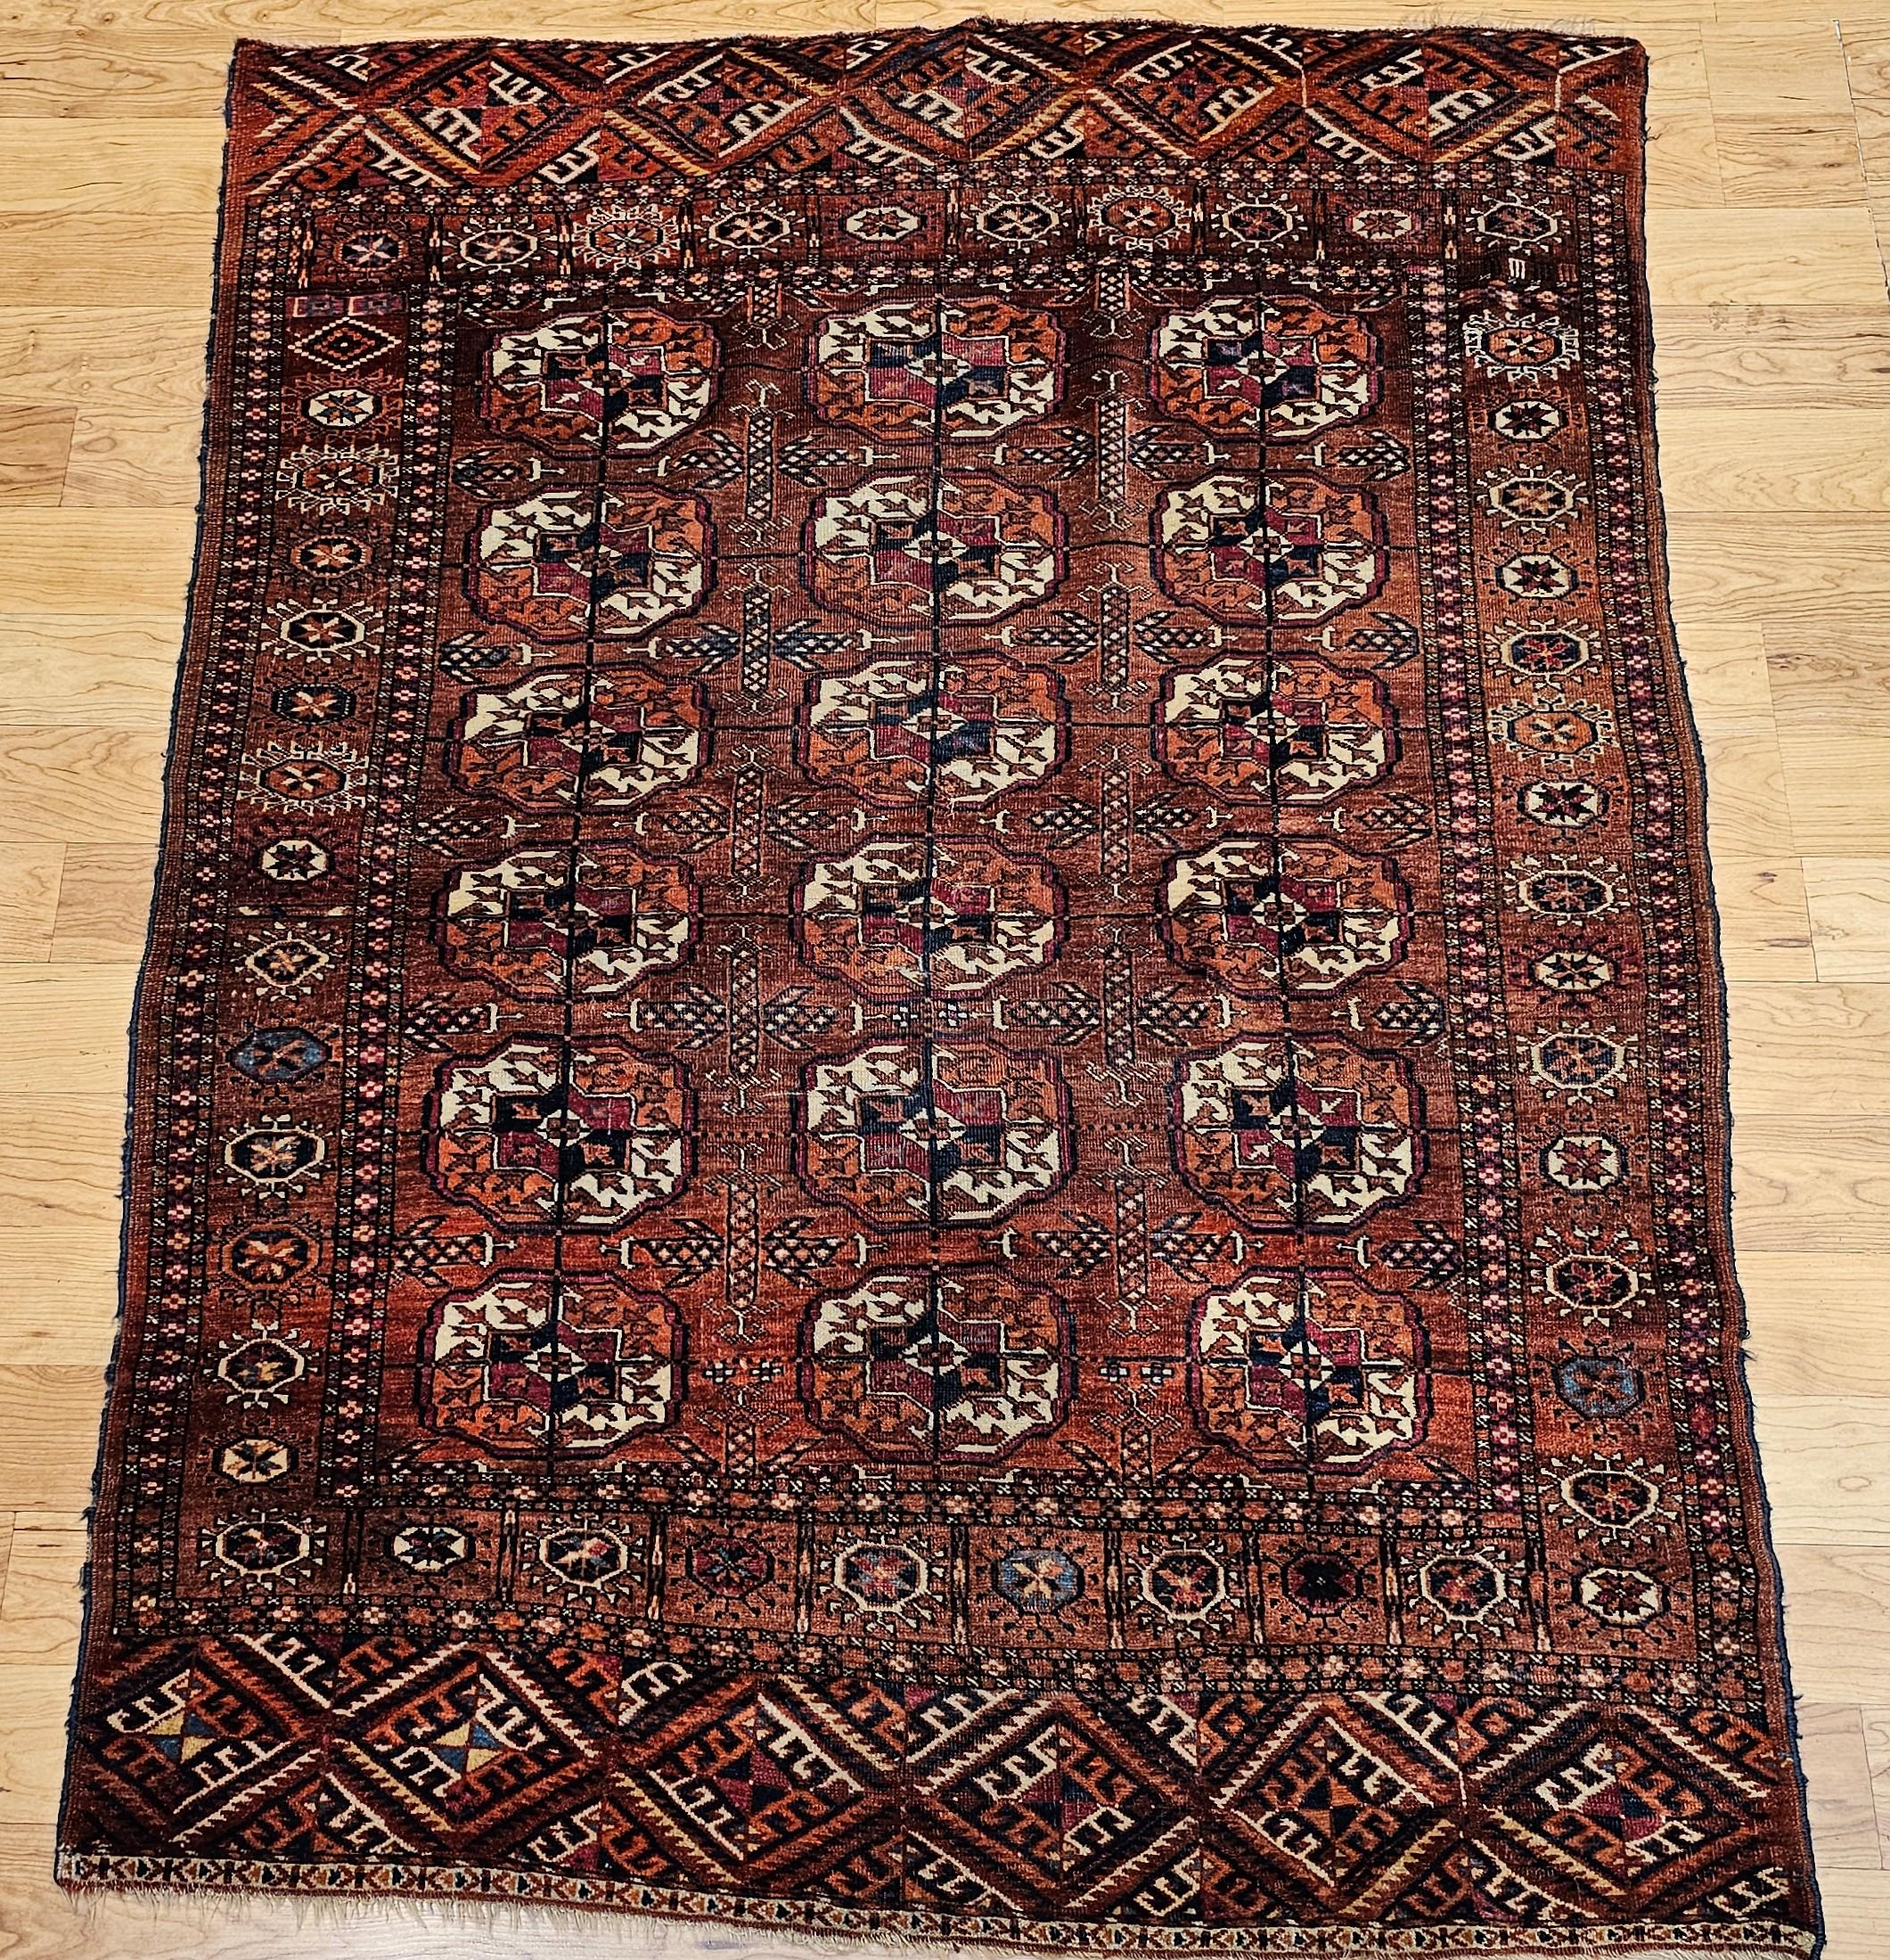 Vintage Turkmen Tekke area rug in an allover small medallion pattern from the late 1800s.  The rug has a beautiful and graceful red background color.  The medallions are in crimson, navy, ivory, and rust.  Rug has a very fine weave with high knot